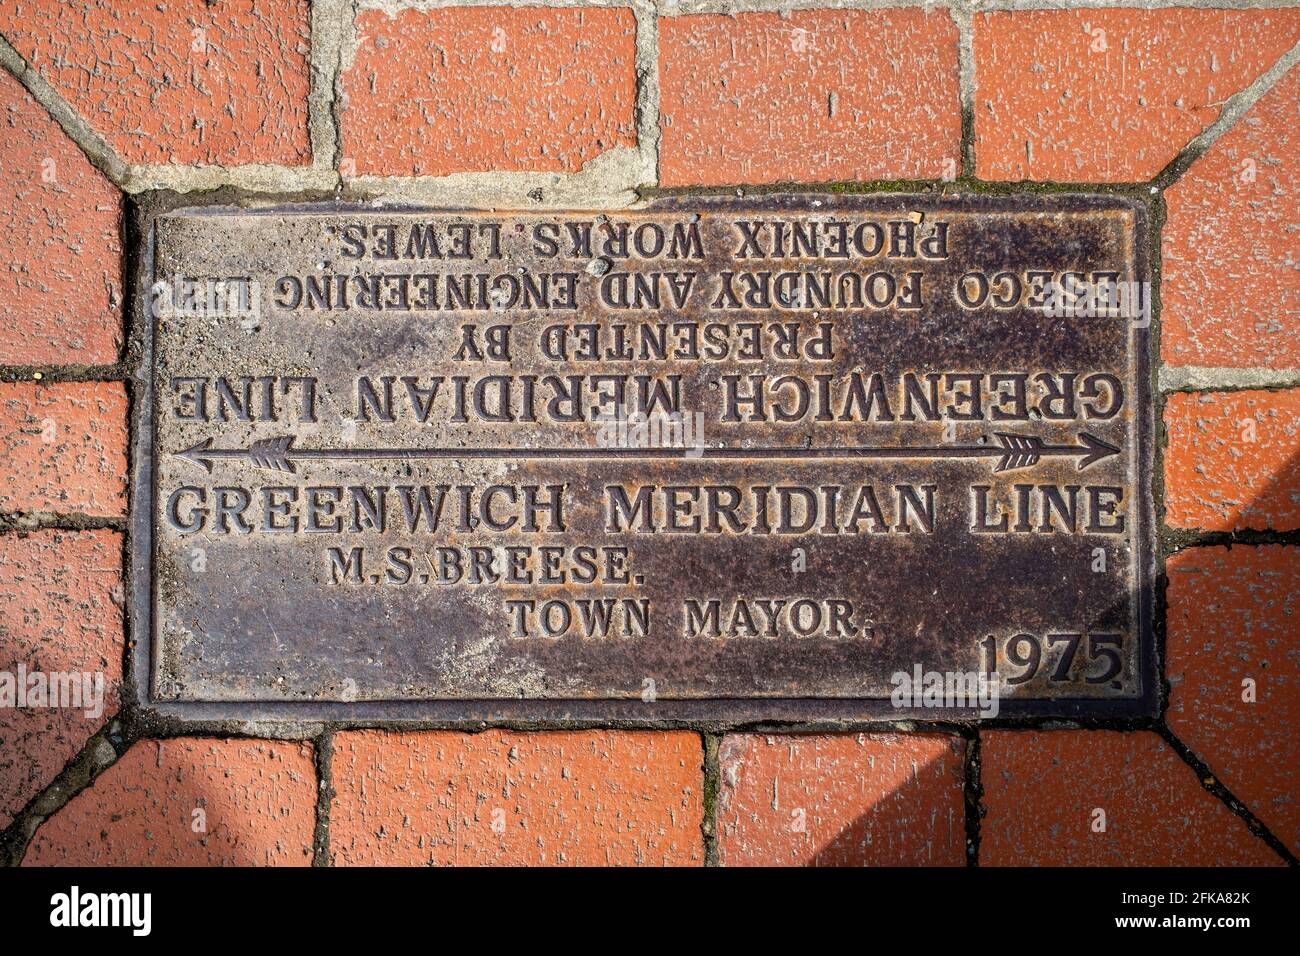 The Greenwich Meridian Line Marker, Lewes, East Sussen, UK Stock Photo